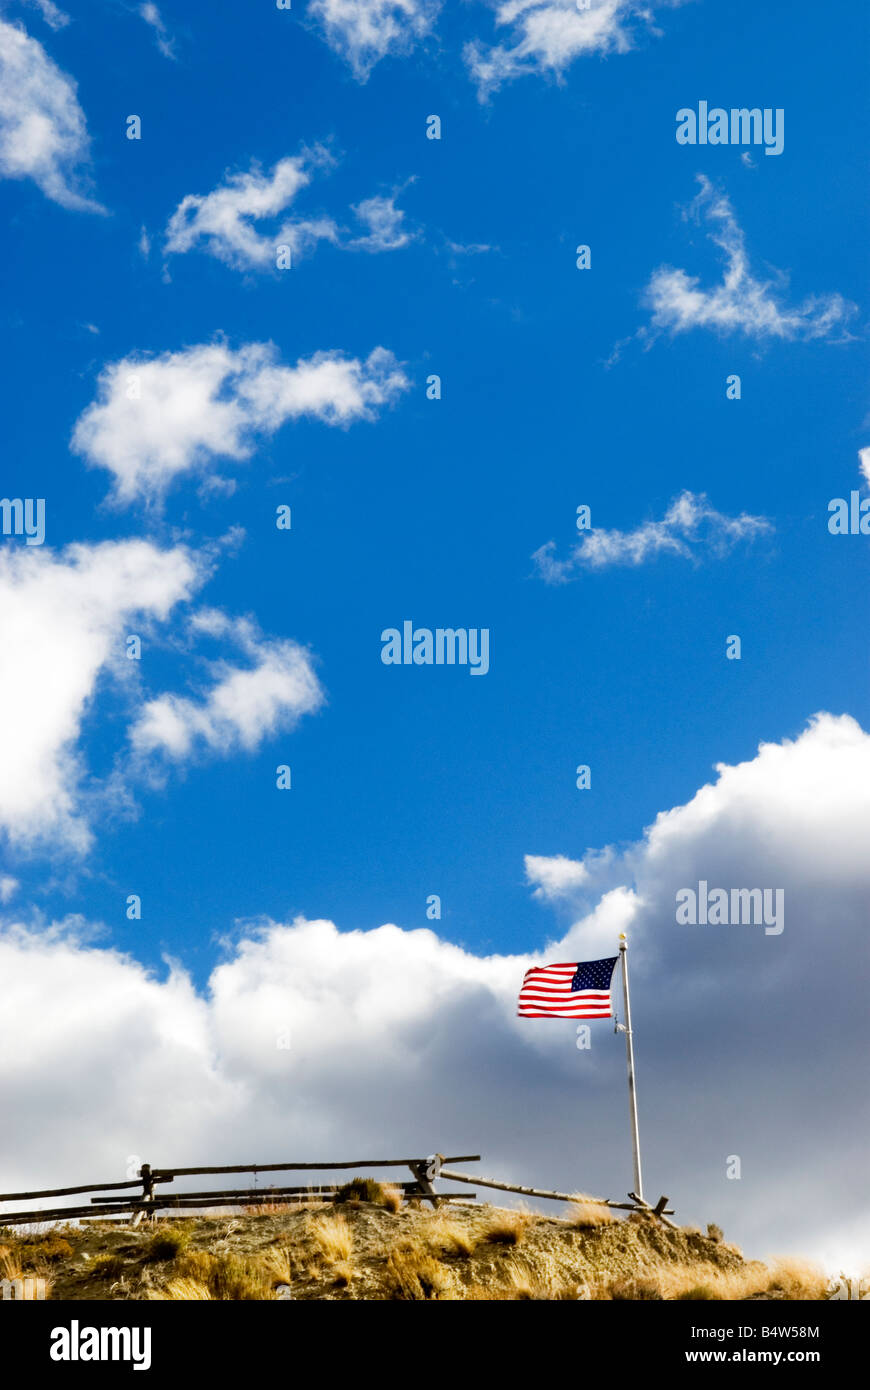 American flag on top of the hill. Blue sky and white clouds above. Stock Photo